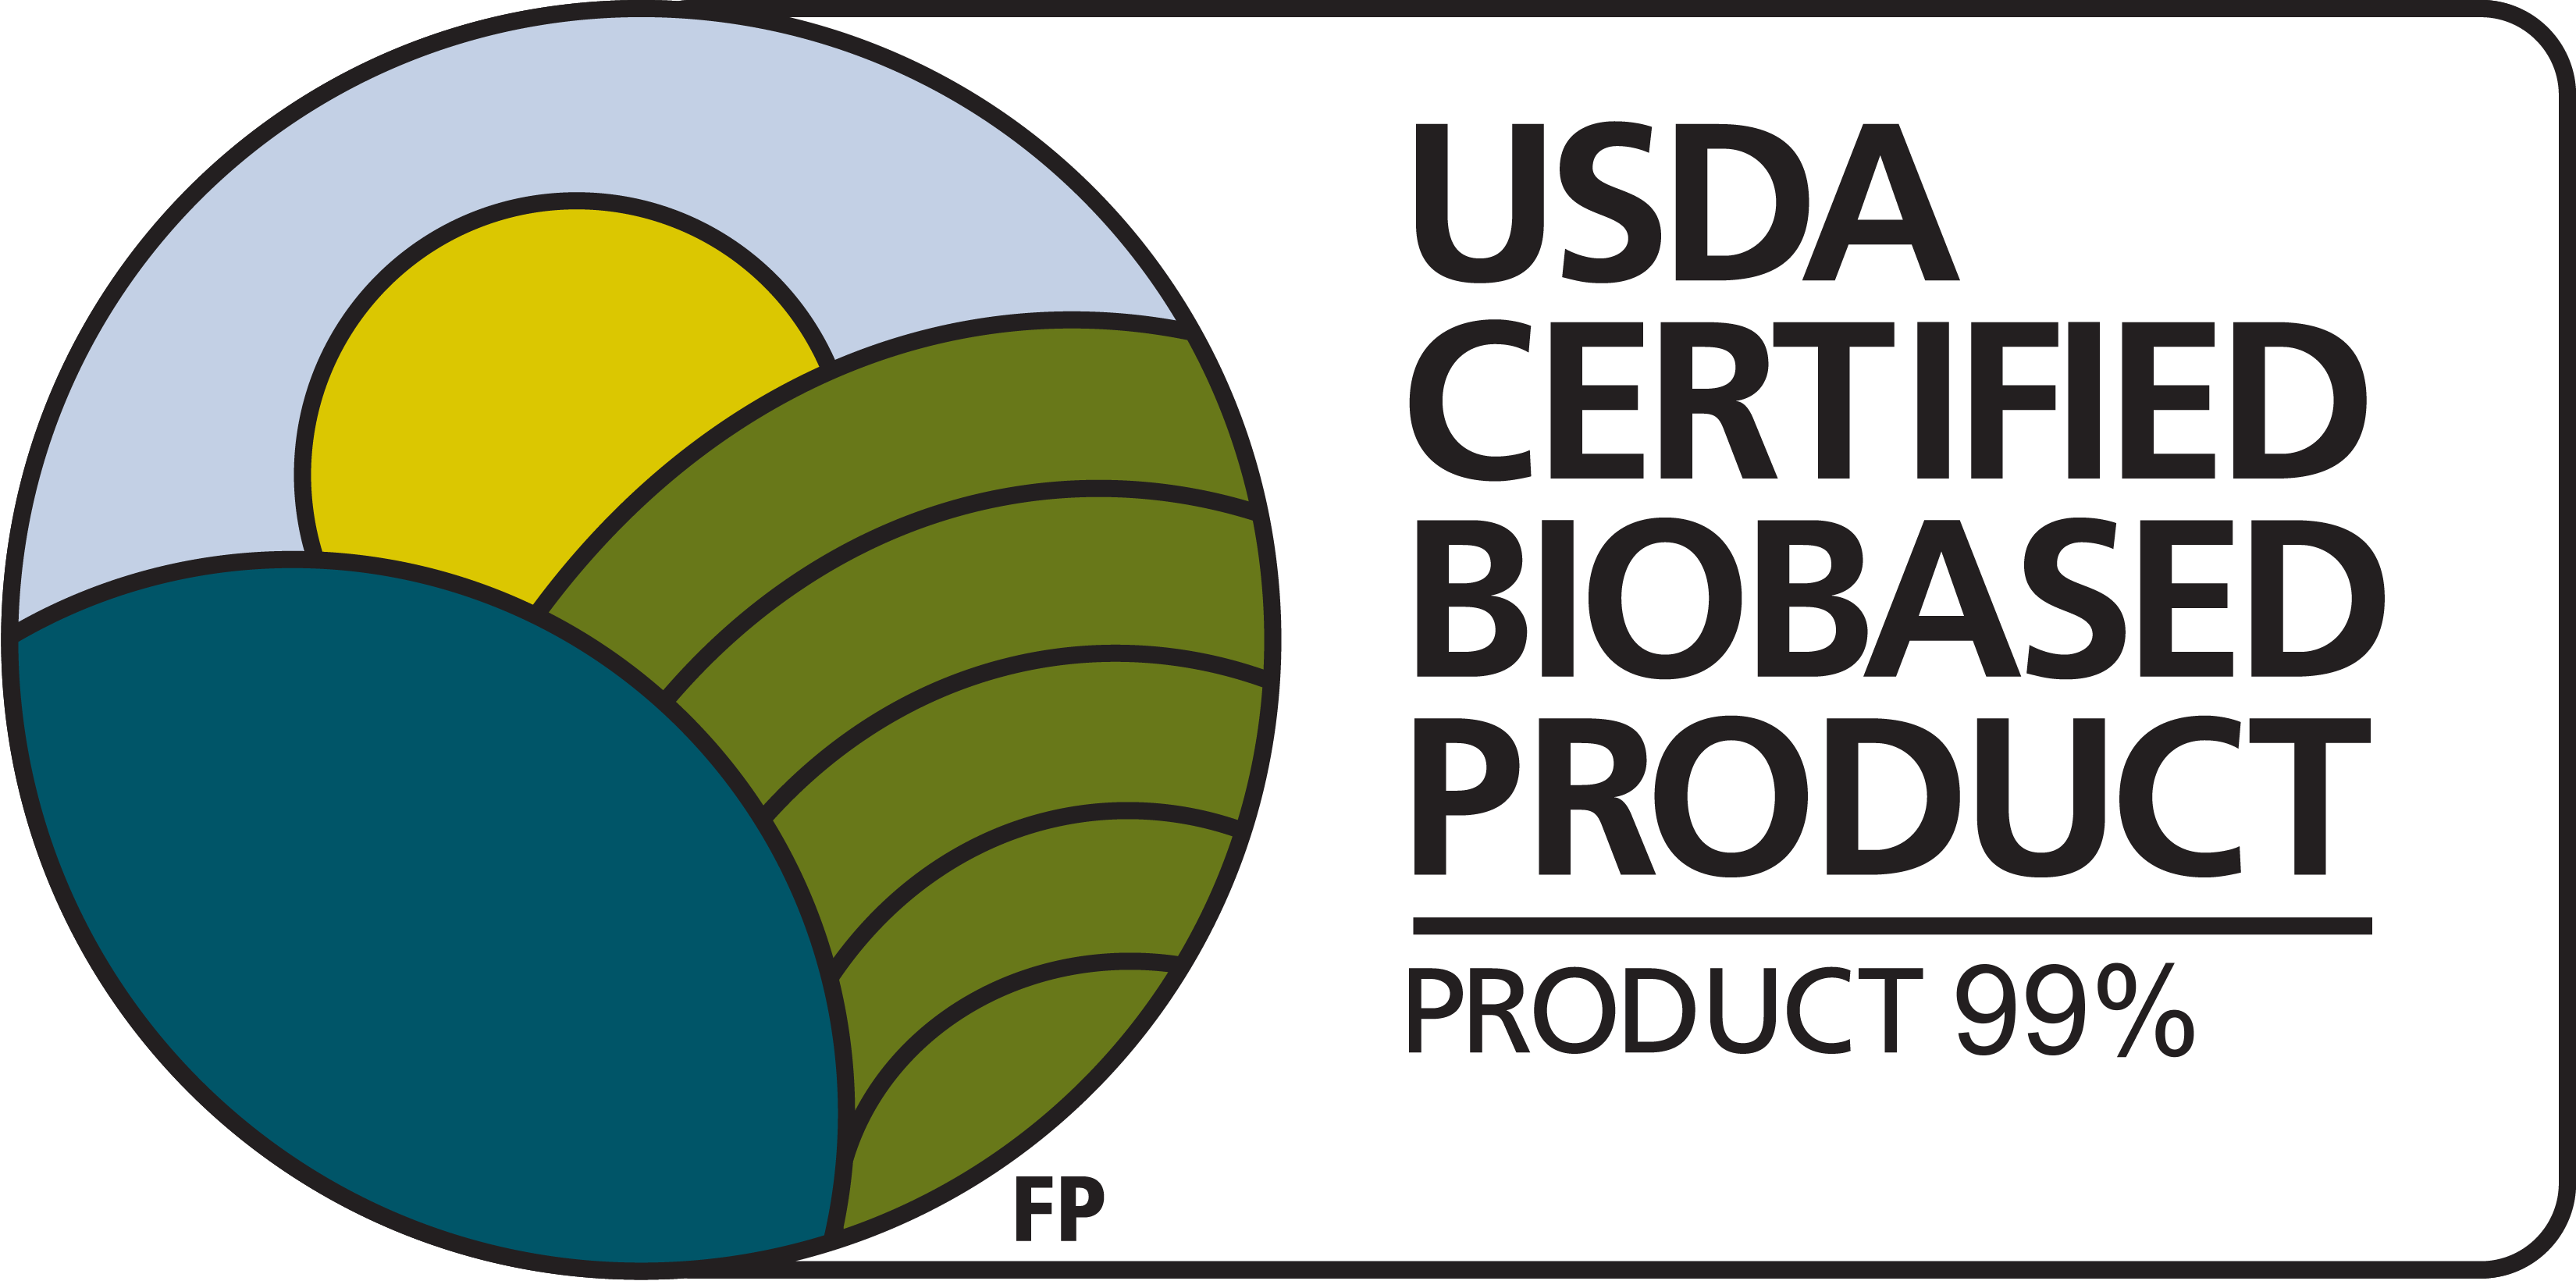 USDA Certified Biobased Product Label for Honest Rock the Bump Body Butter